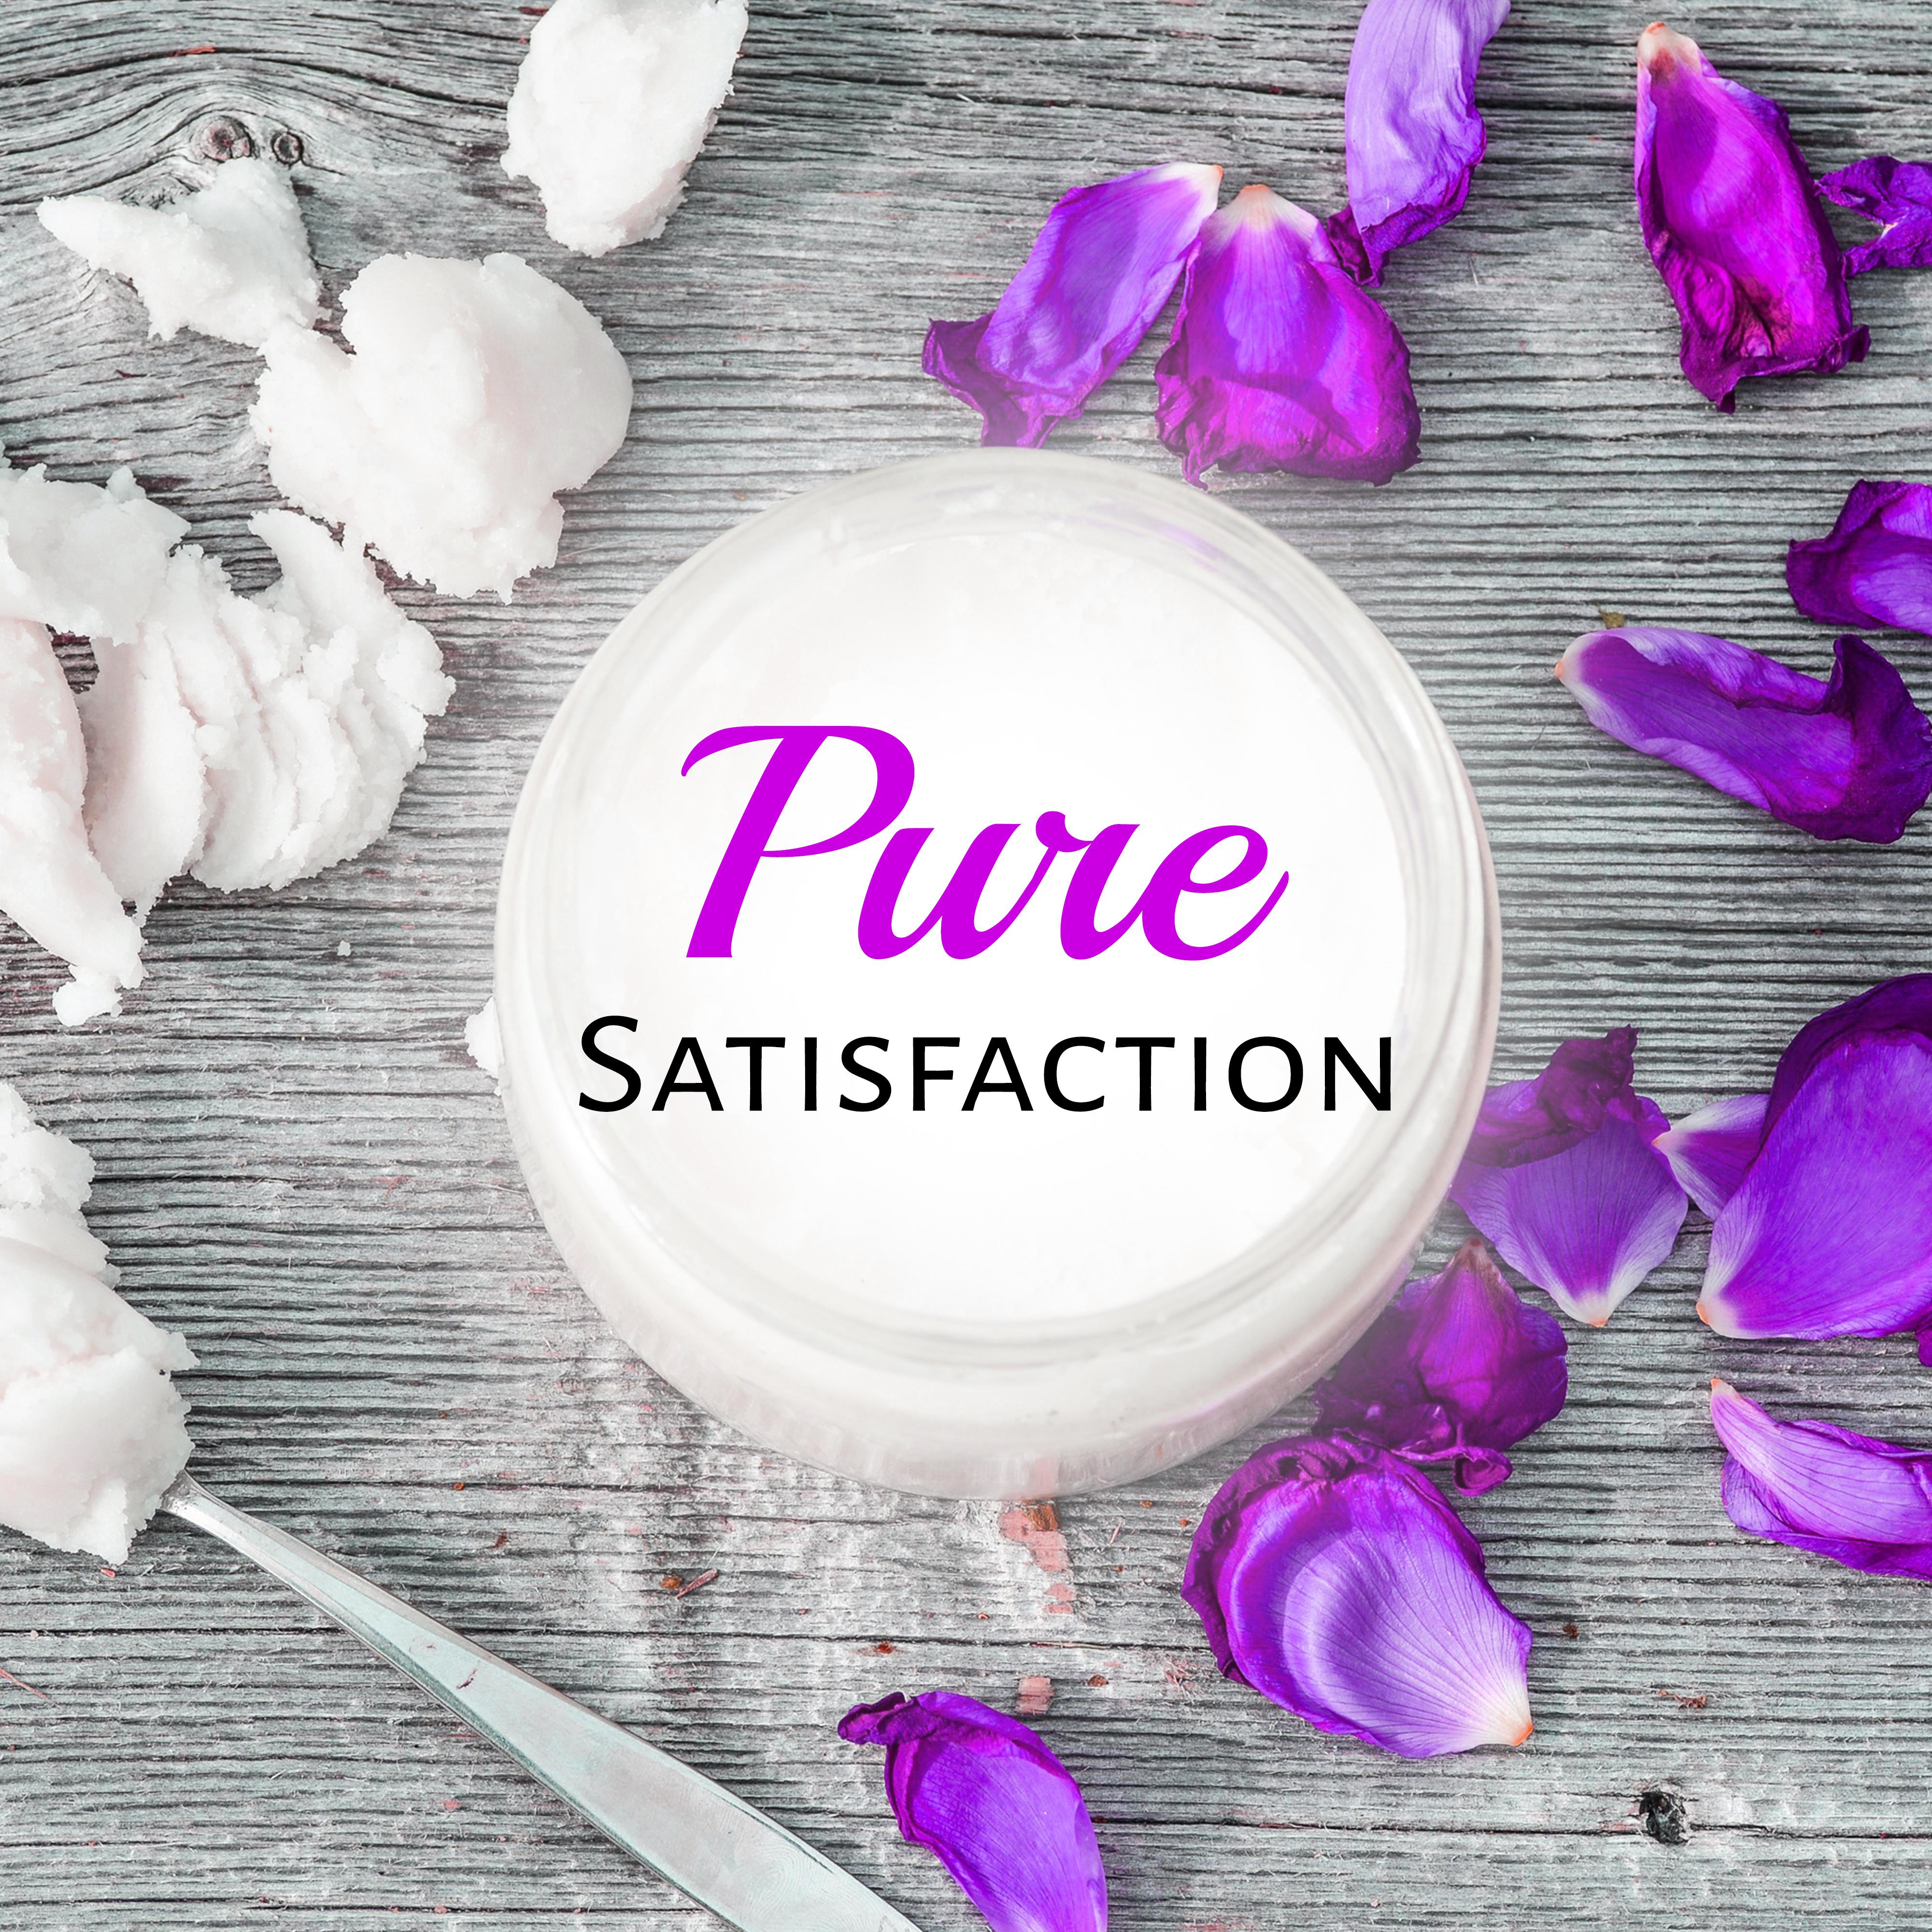 Pure Satisfaction  Music for Massage, Spa Relaxation, Healing Music, Relaxing Therapy